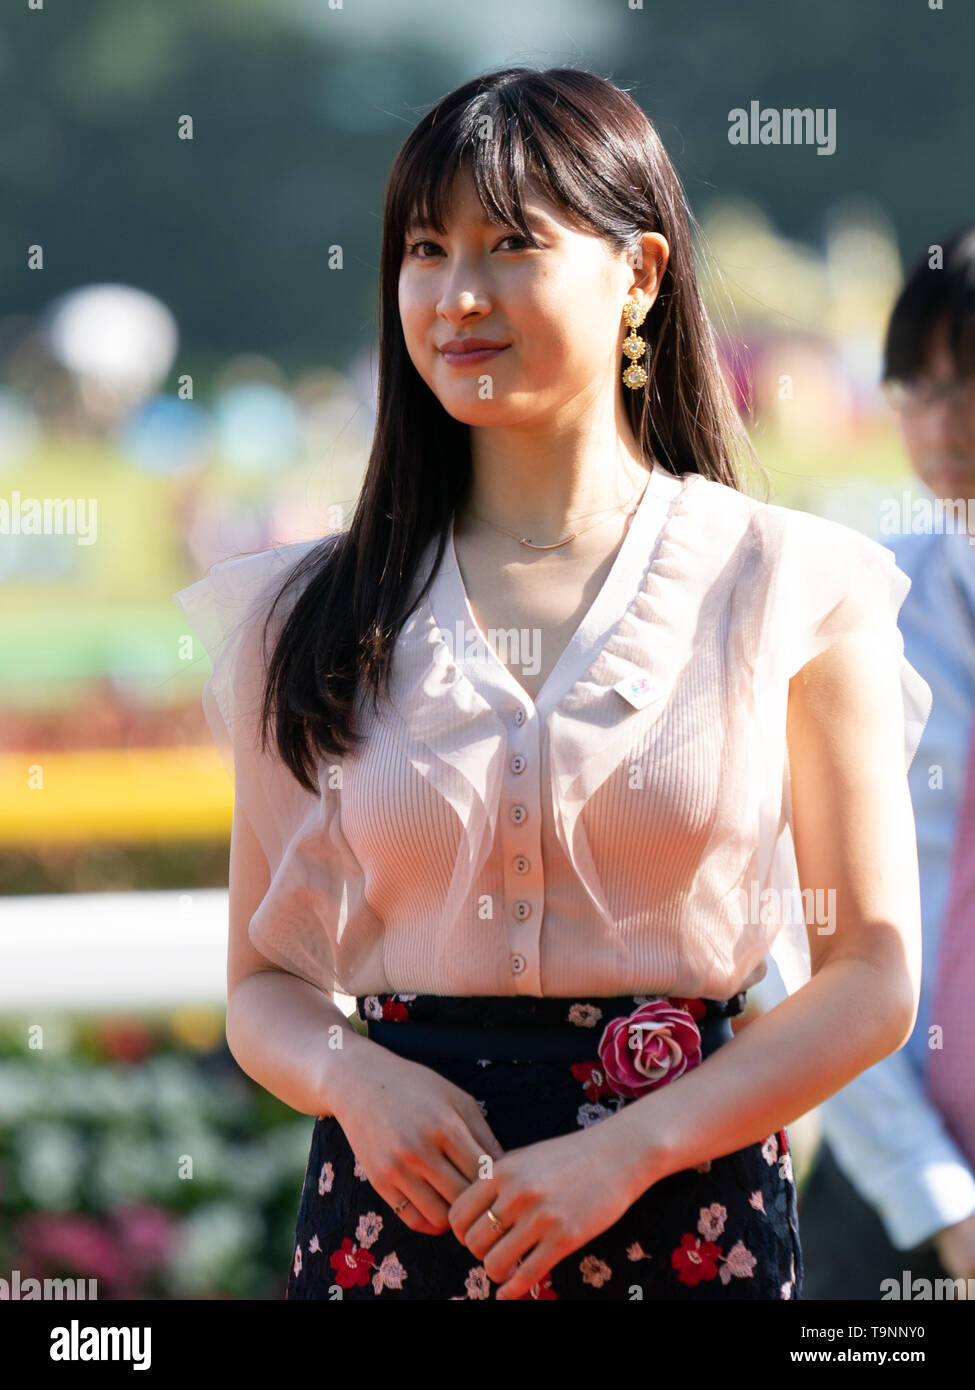 Japanese Actress Tao Tsuchiya Attends Winning Ceremony Of The 80th Japanese Oaks G1 2400m At